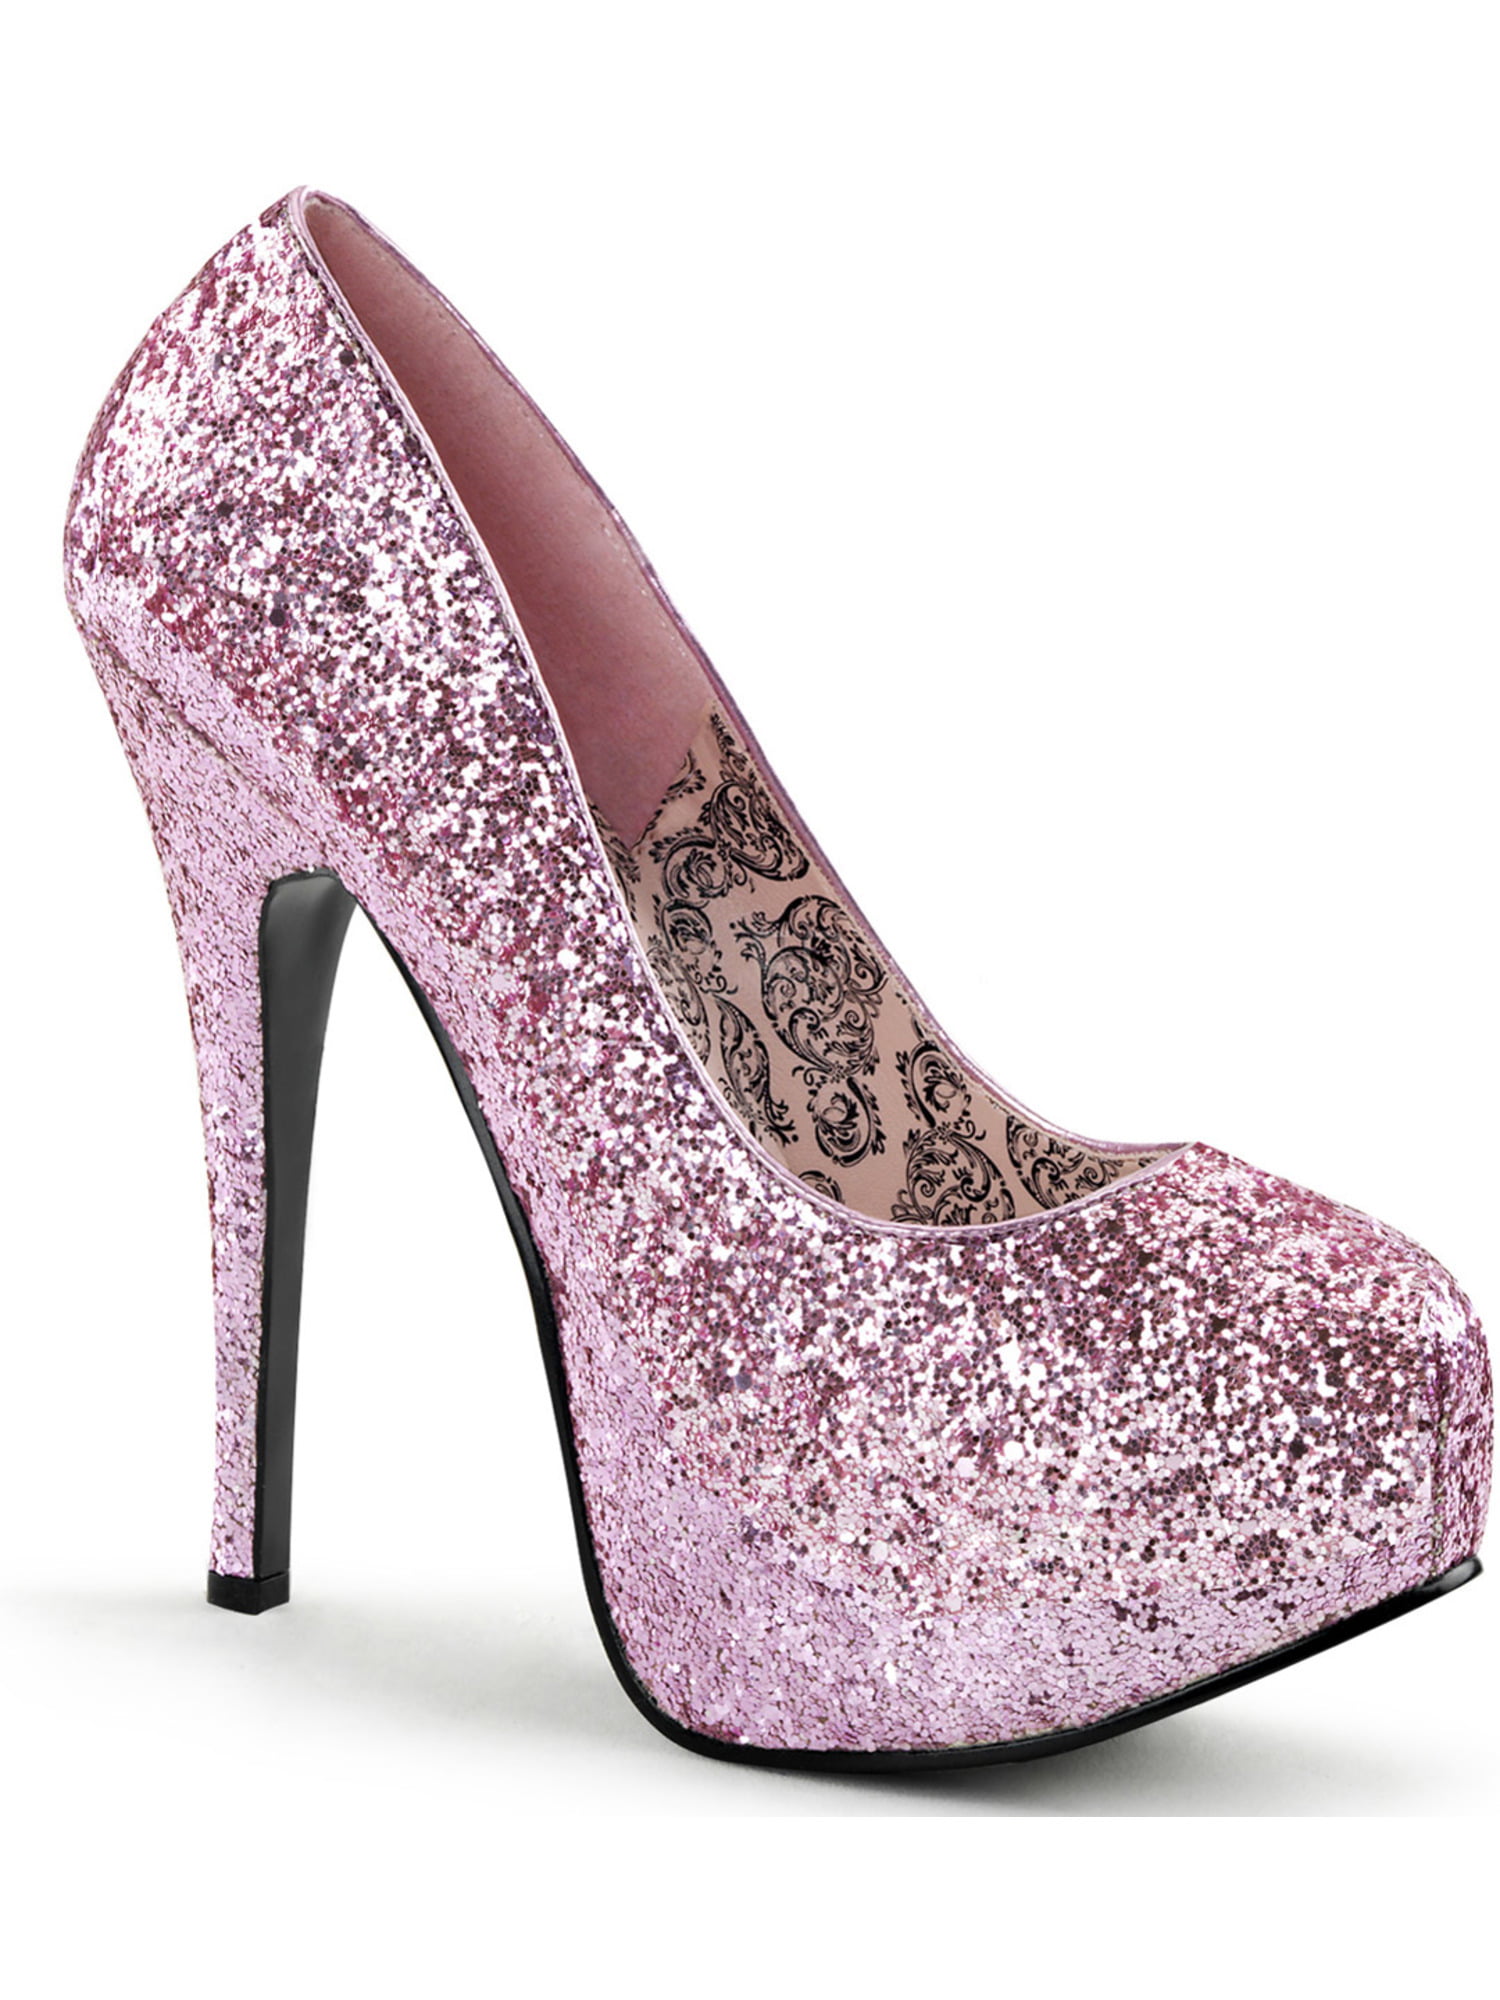 light pink sparkly shoes